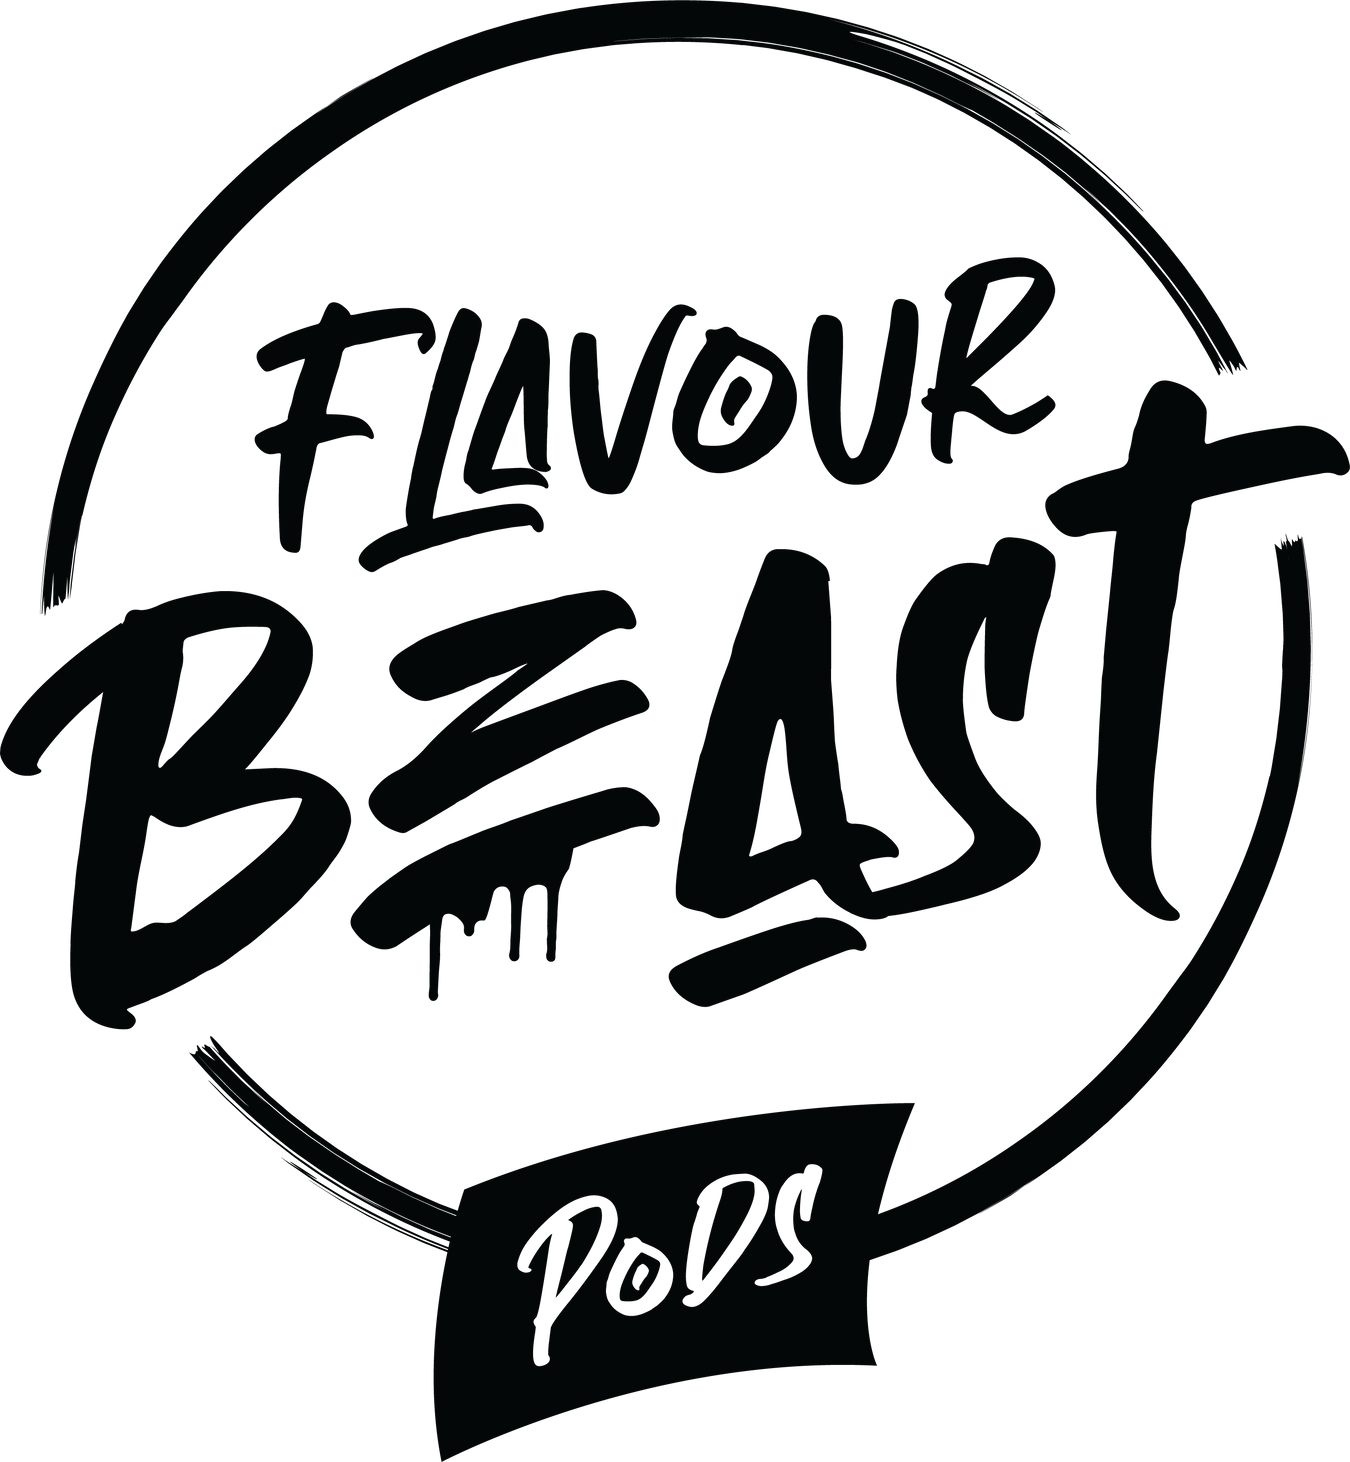 Flavour Beast Pods